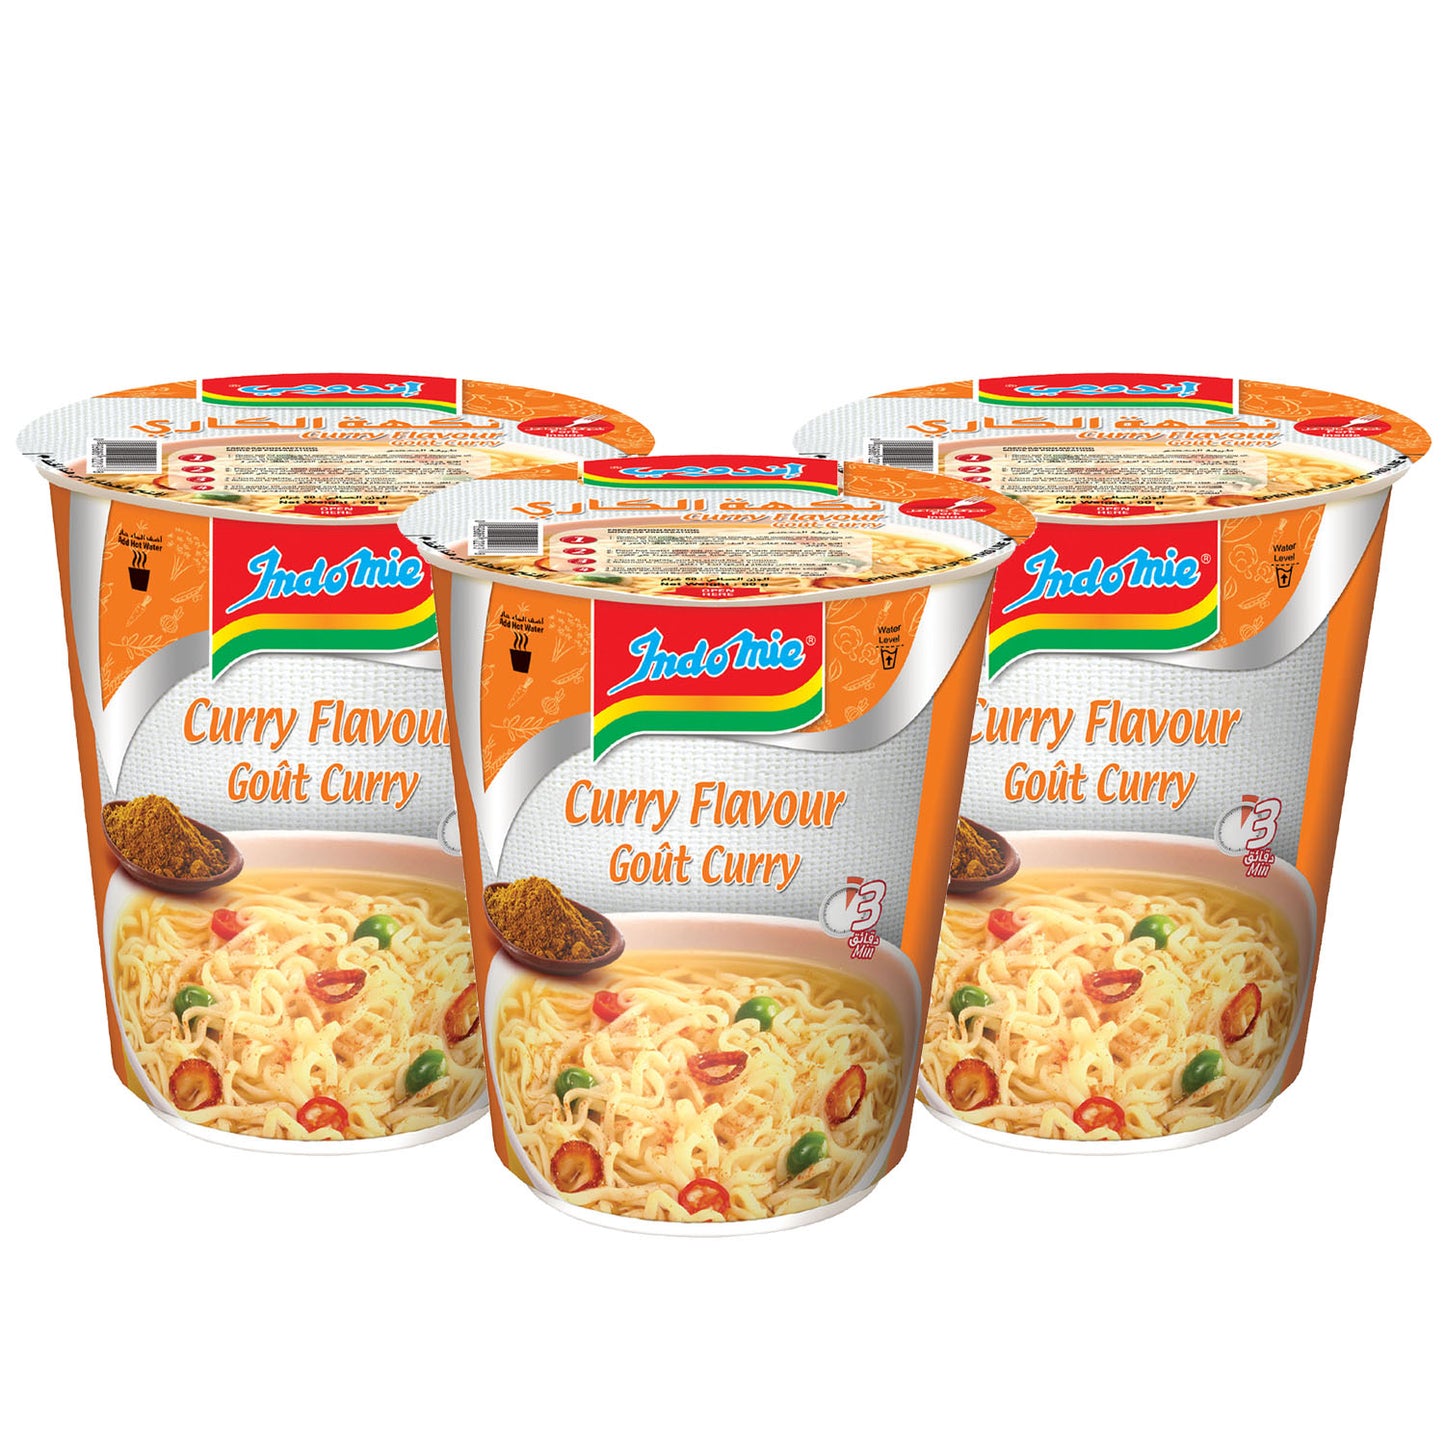 Indomie Instant Cup Noodles, Gout Curry Flavour with Seasoning Powder and Sauce-60 g(Pack of 3)